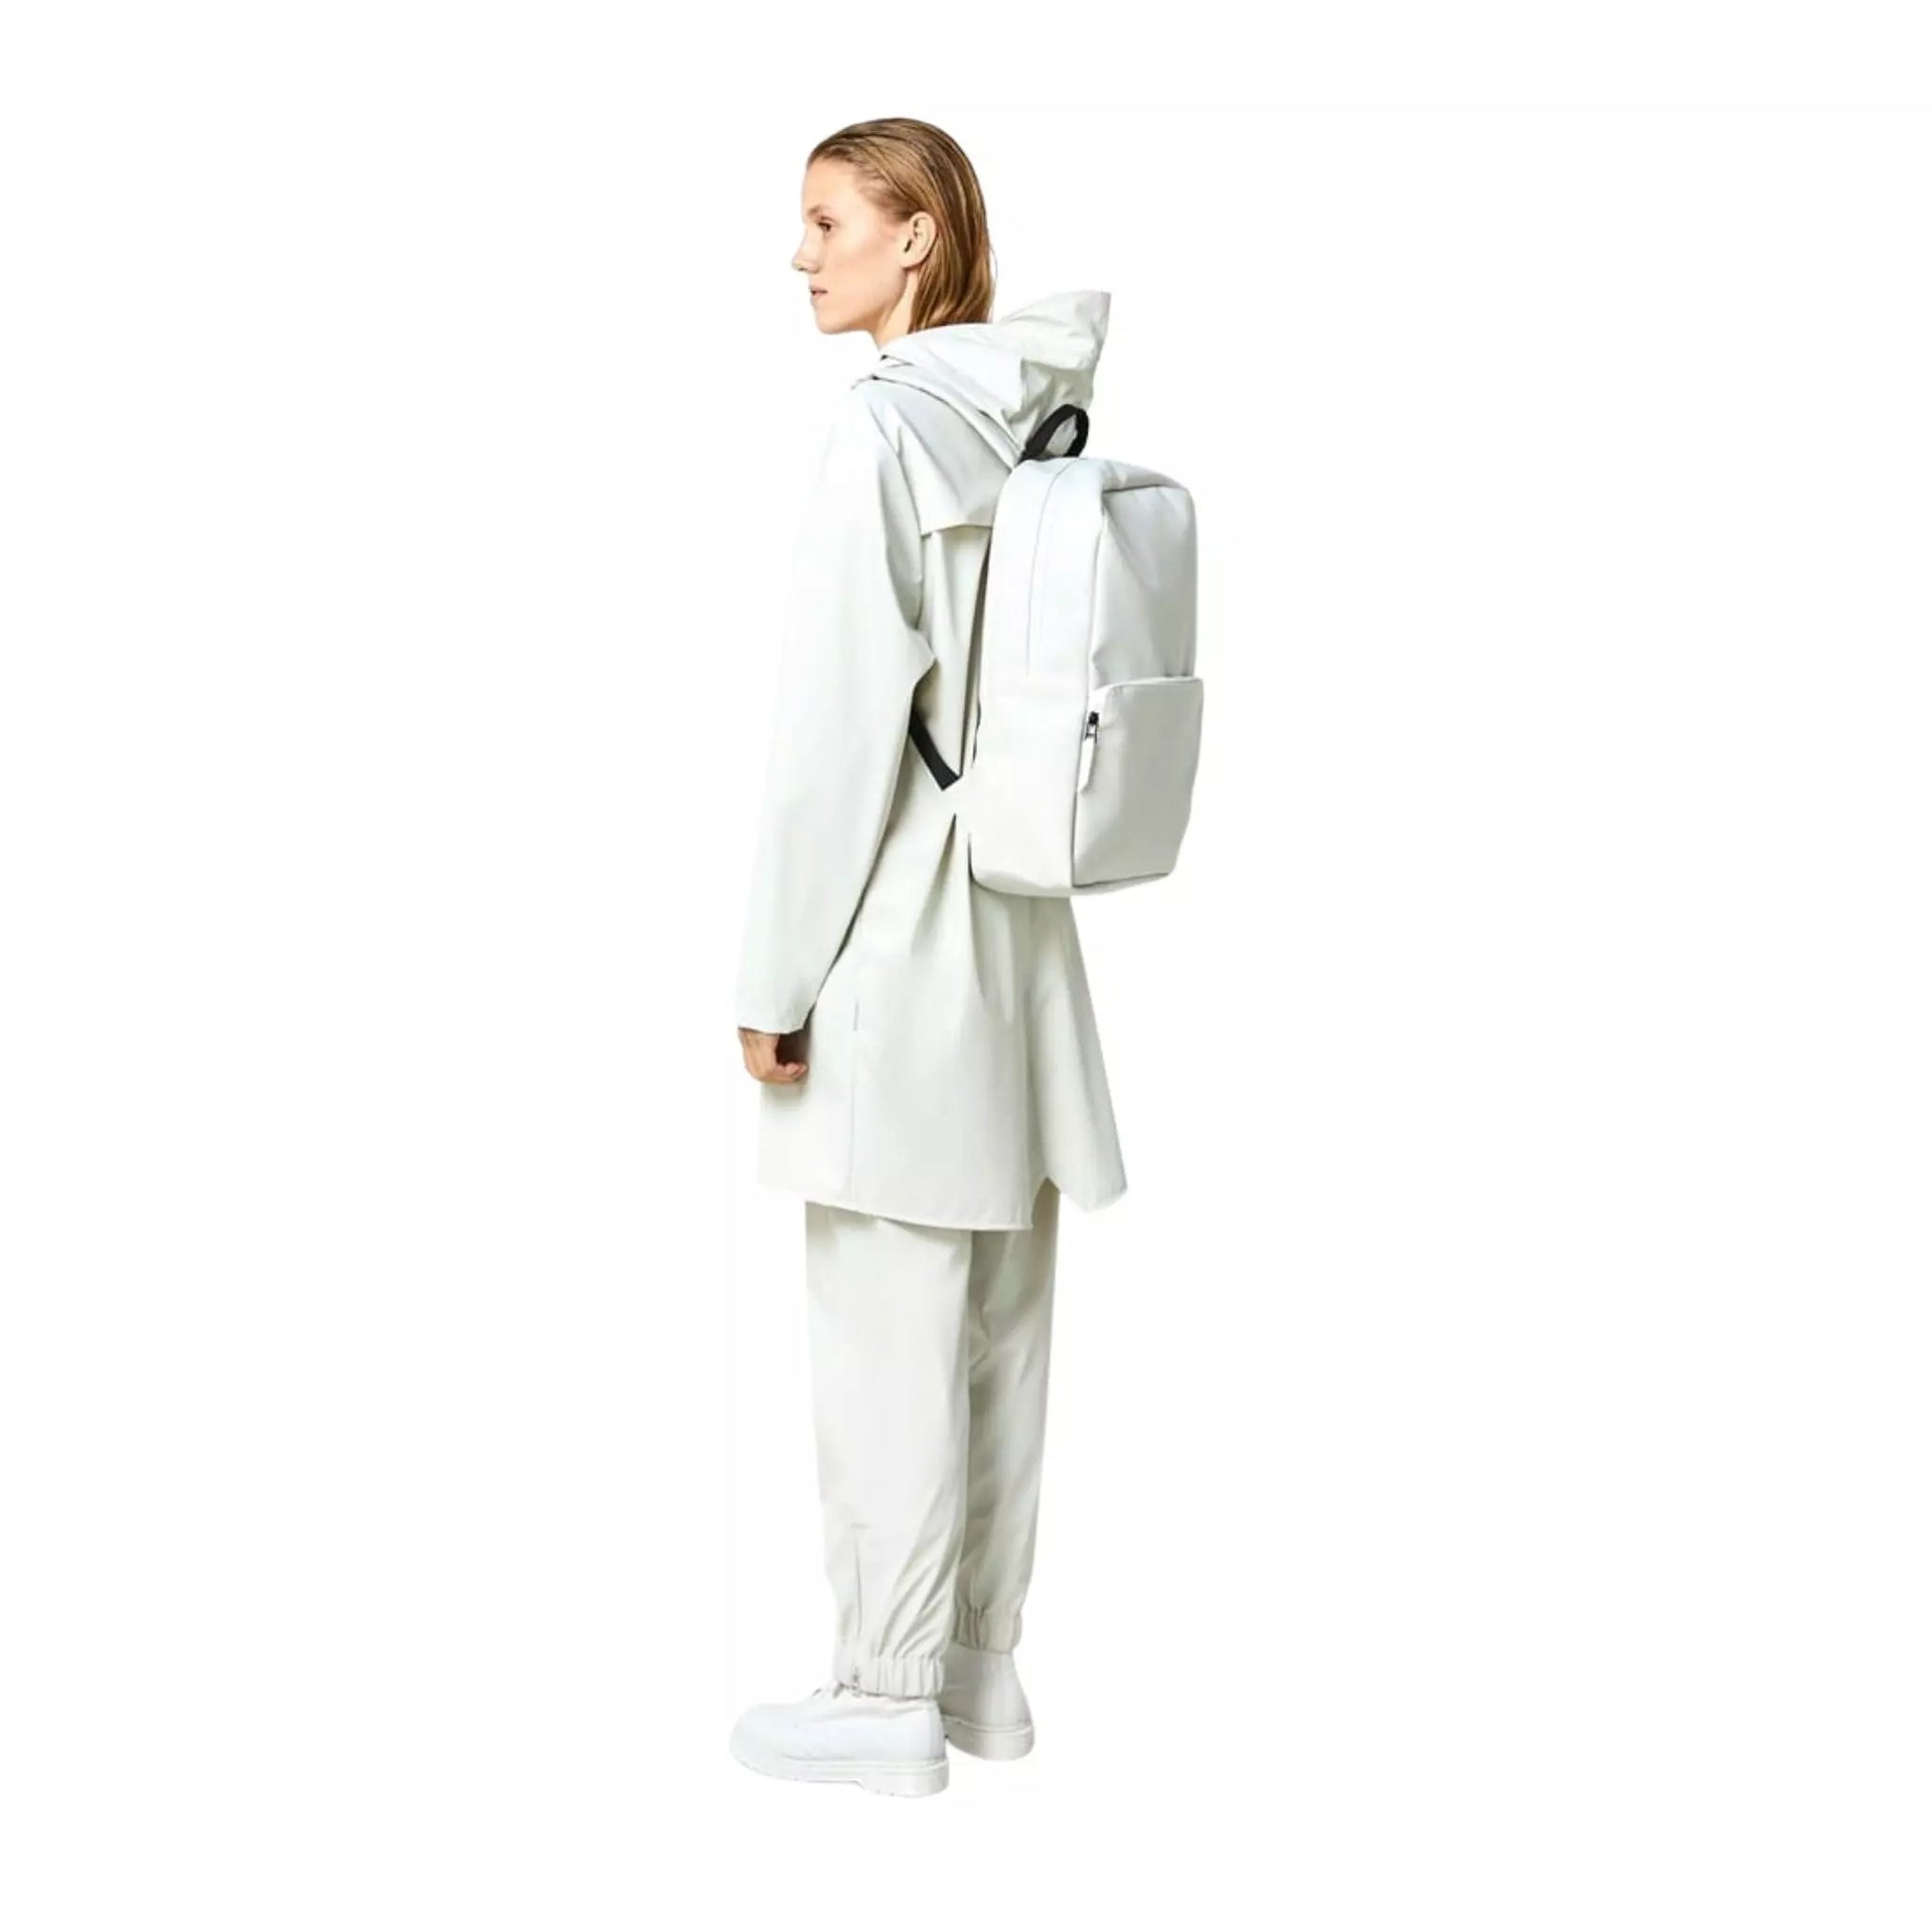 Rains waterproof backpack field bag off white worn on the back of a woman